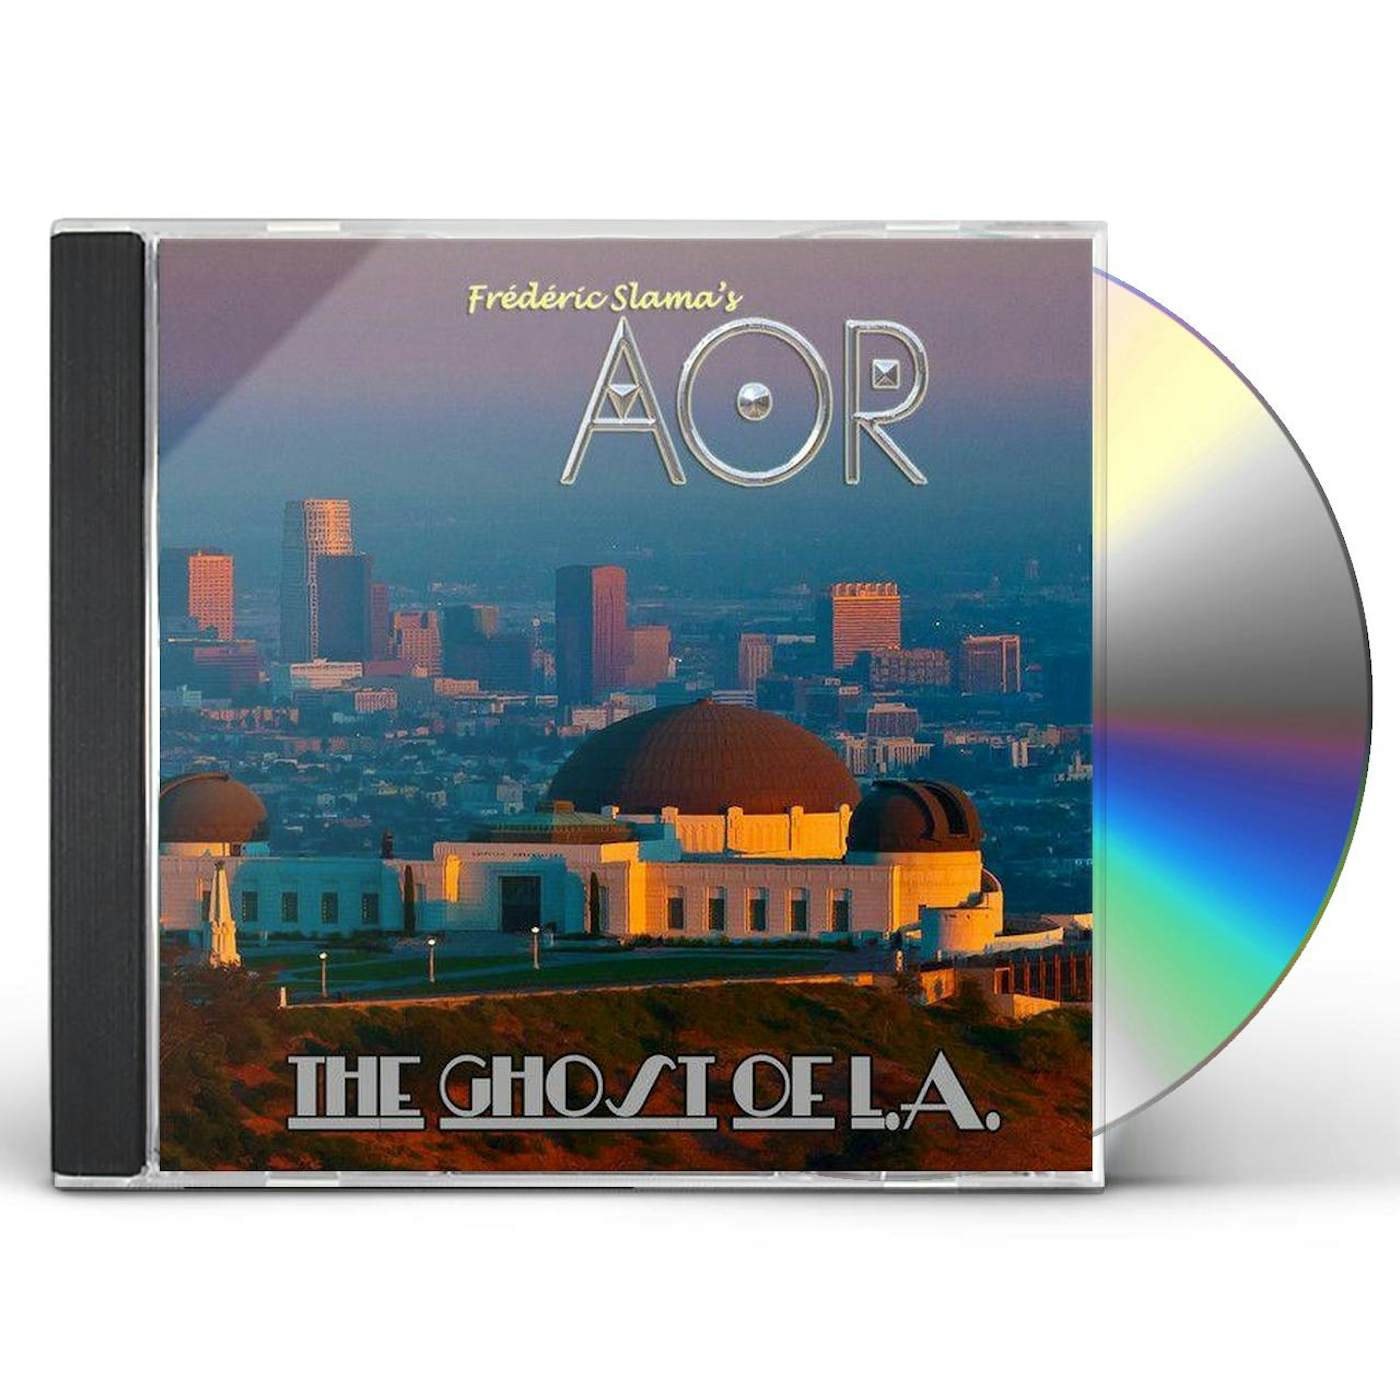 AOR GHOST OF L.A. CD